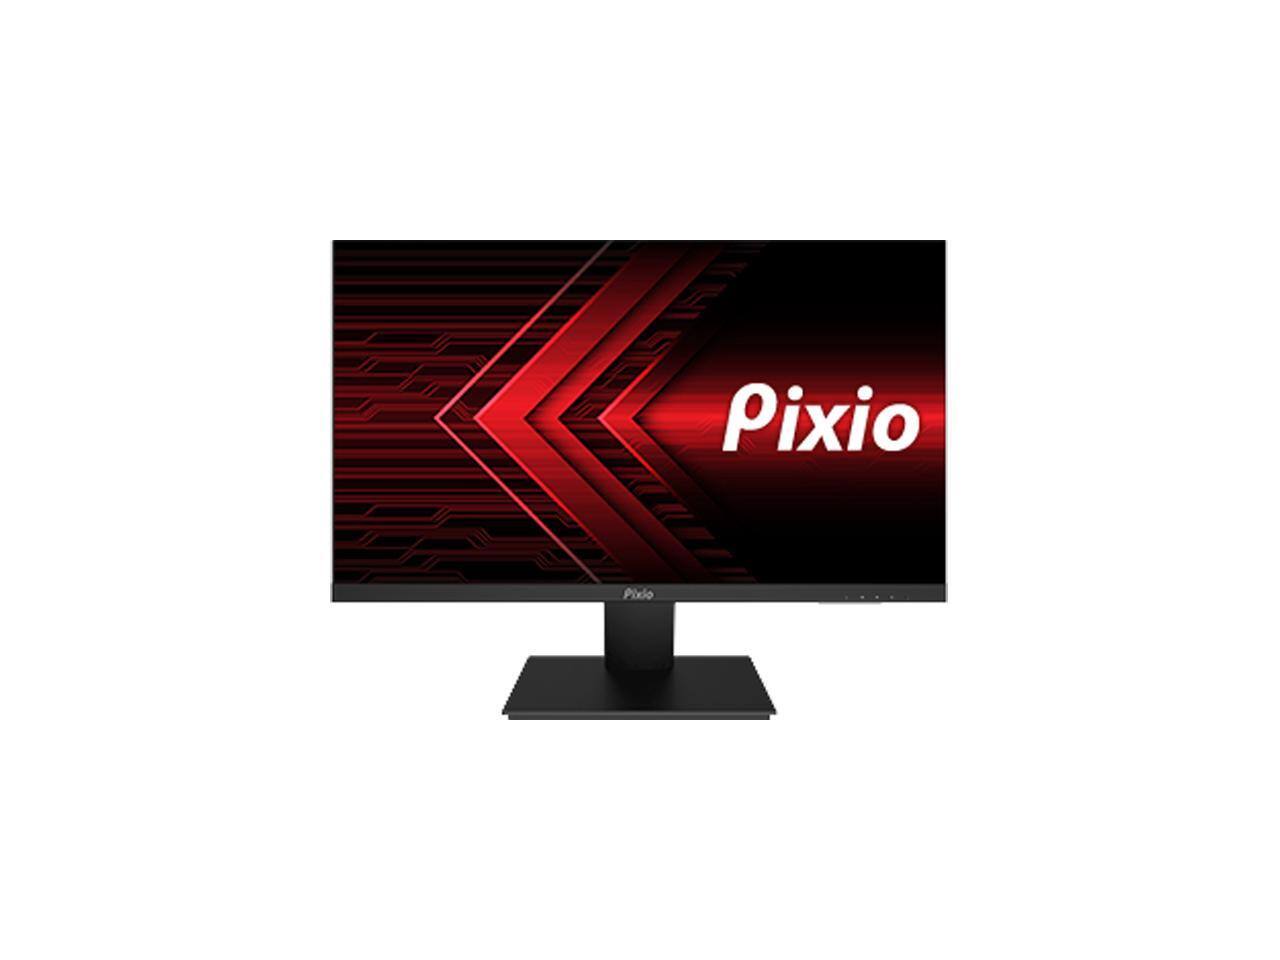 Pixio PX259 Prime [24.5", IPS, Full HD/1920 x 1080, 350 cd/m2, 280 Hz] Gaming Monitor for $279.99 w/ FS after Code